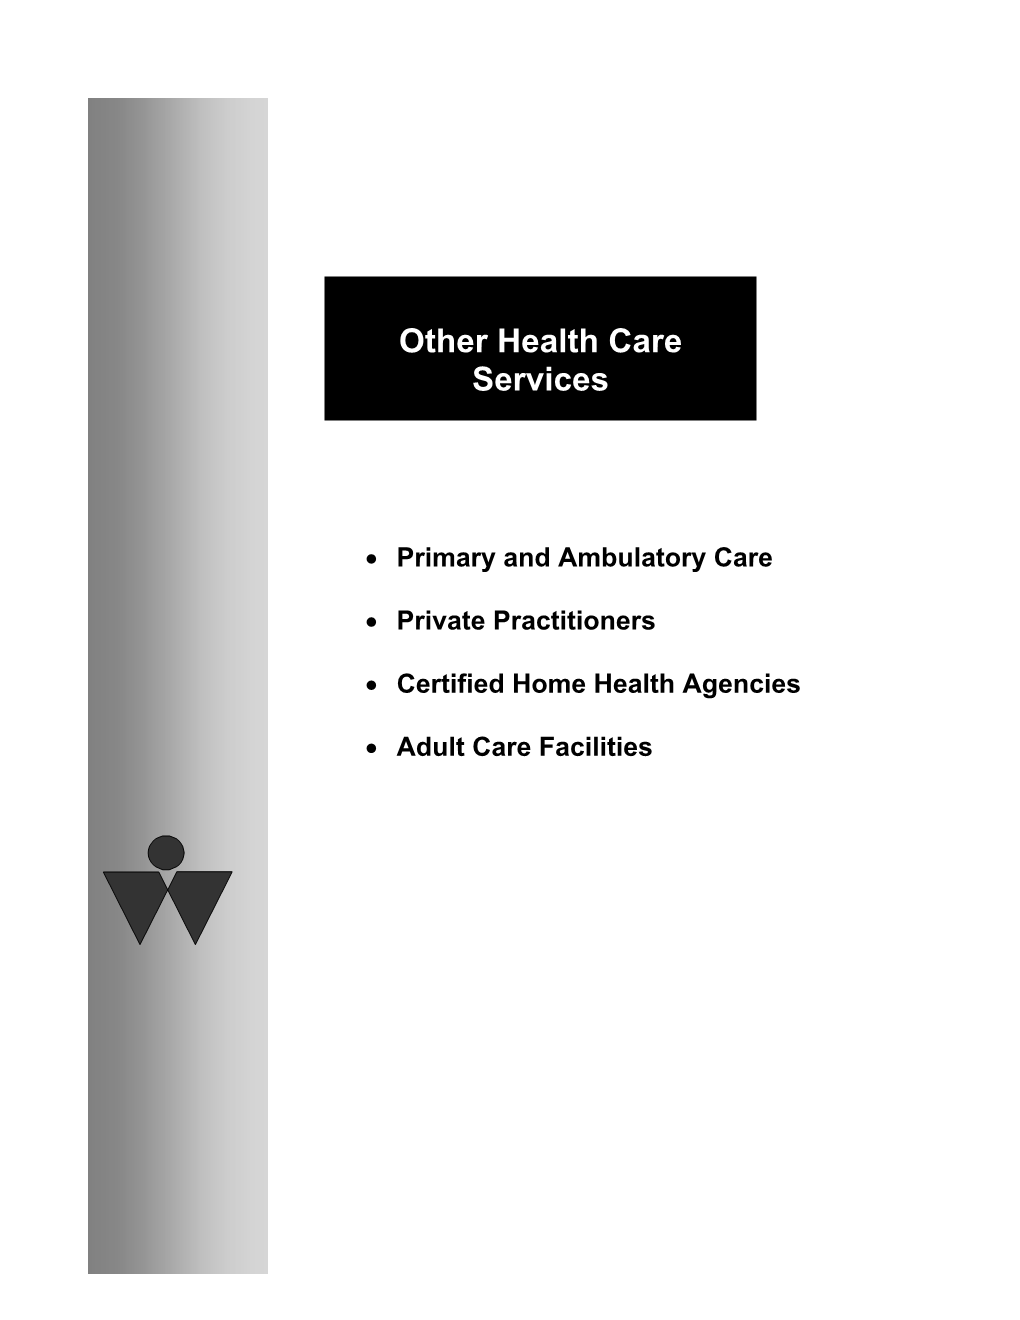 Other Health Services